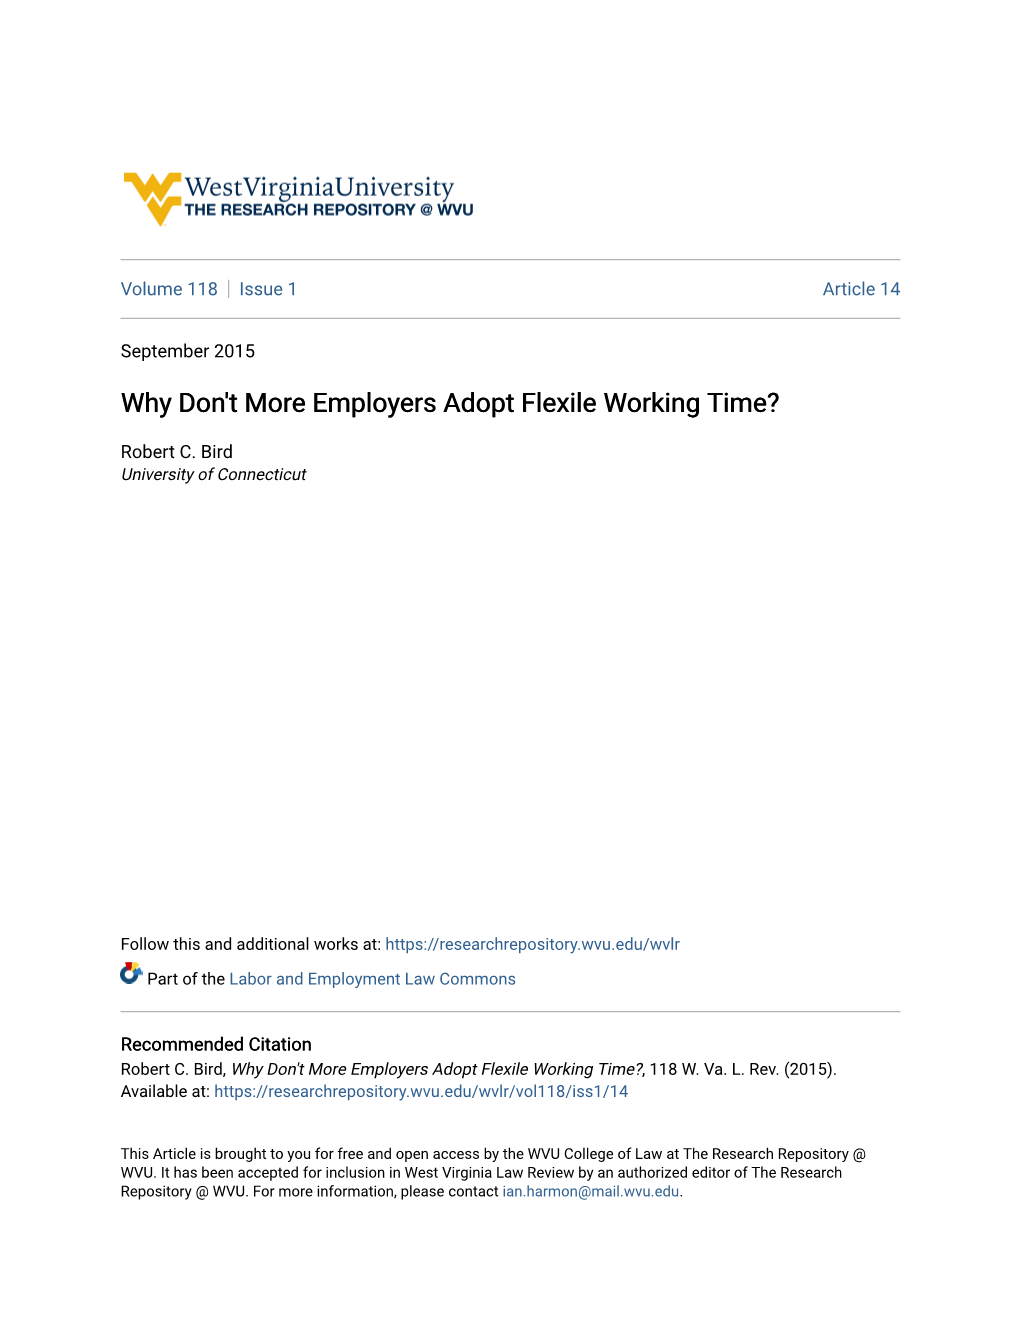 Why Don't More Employers Adopt Flexile Working Time?